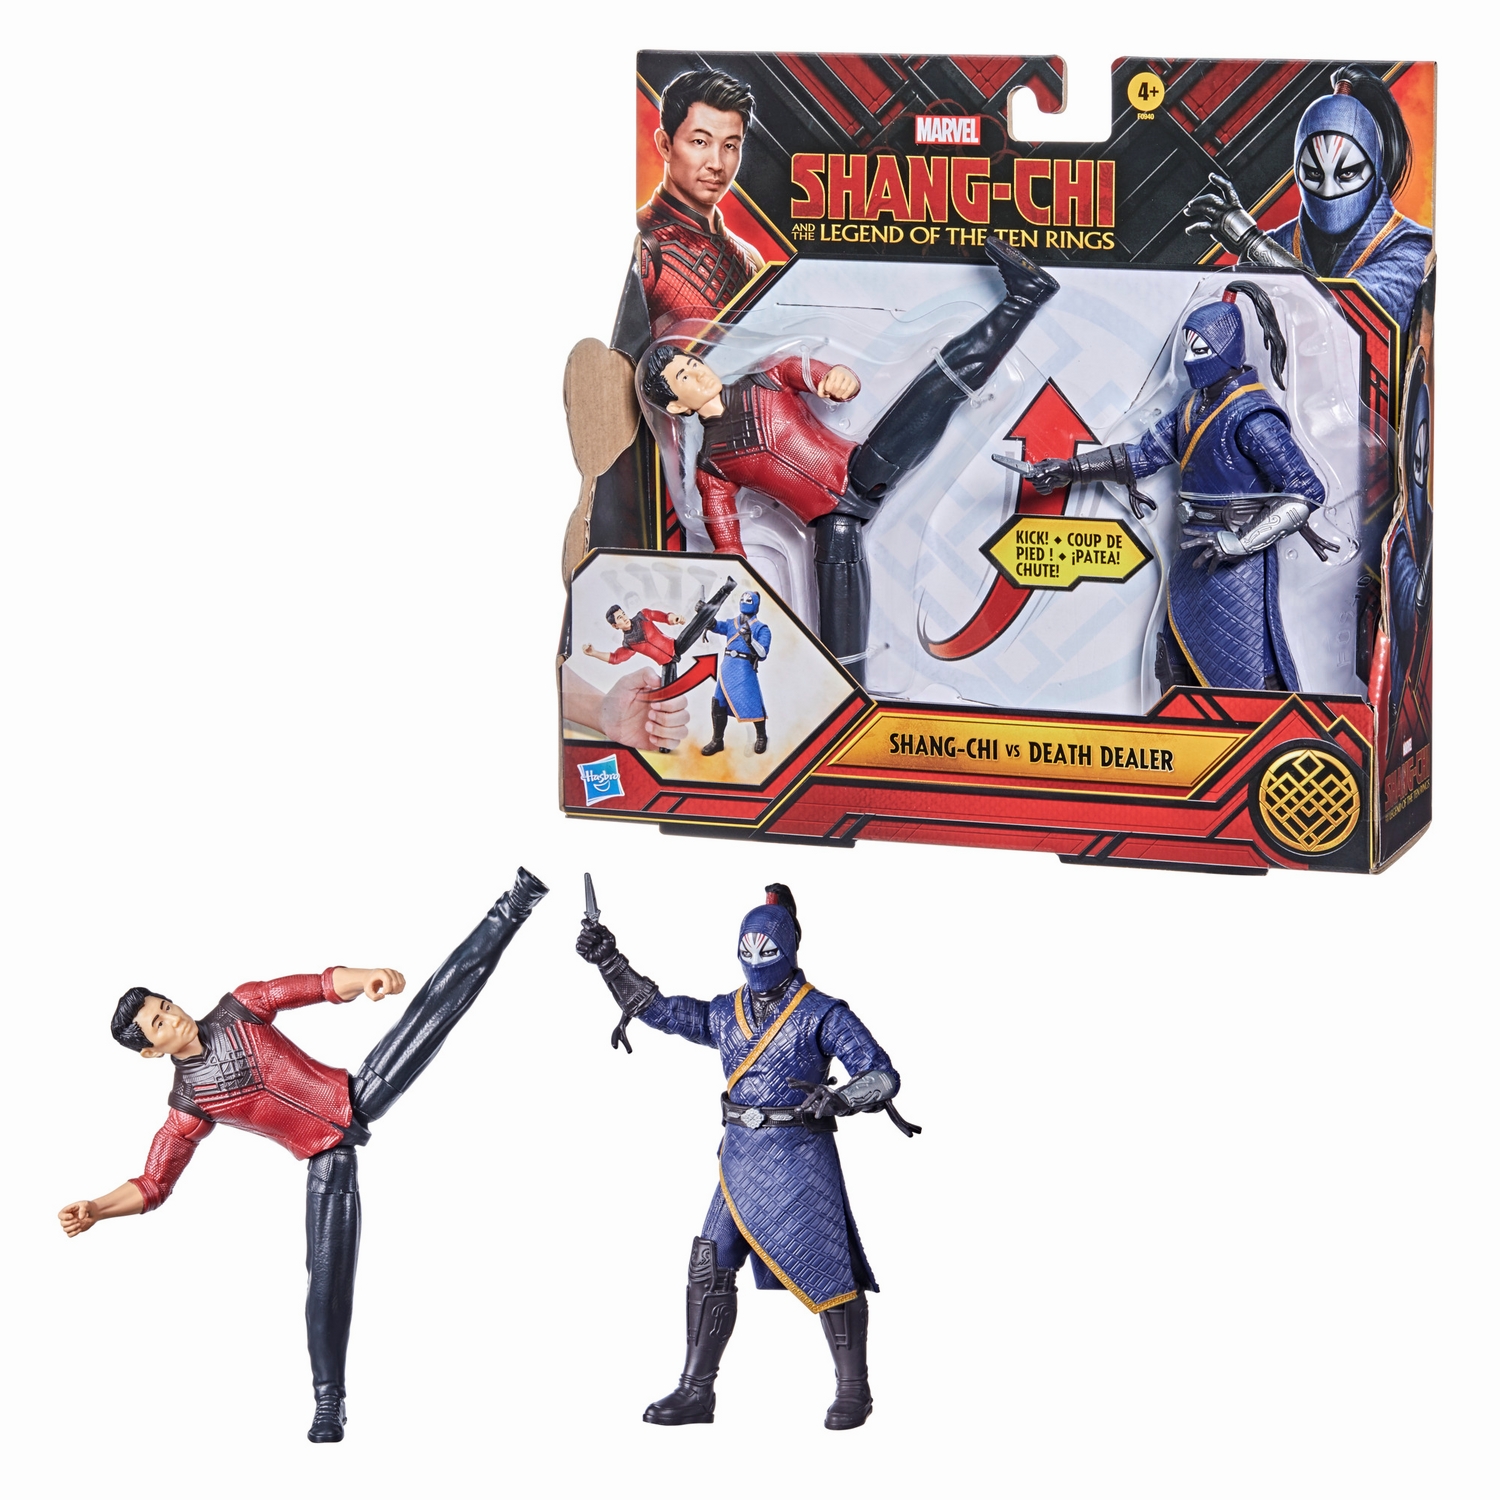 MARVEL SHANG-CHI AND THE LEGEND OF THE TEN RINGS 6-INCH BATTLE PACK Figures - oop (2).jpg